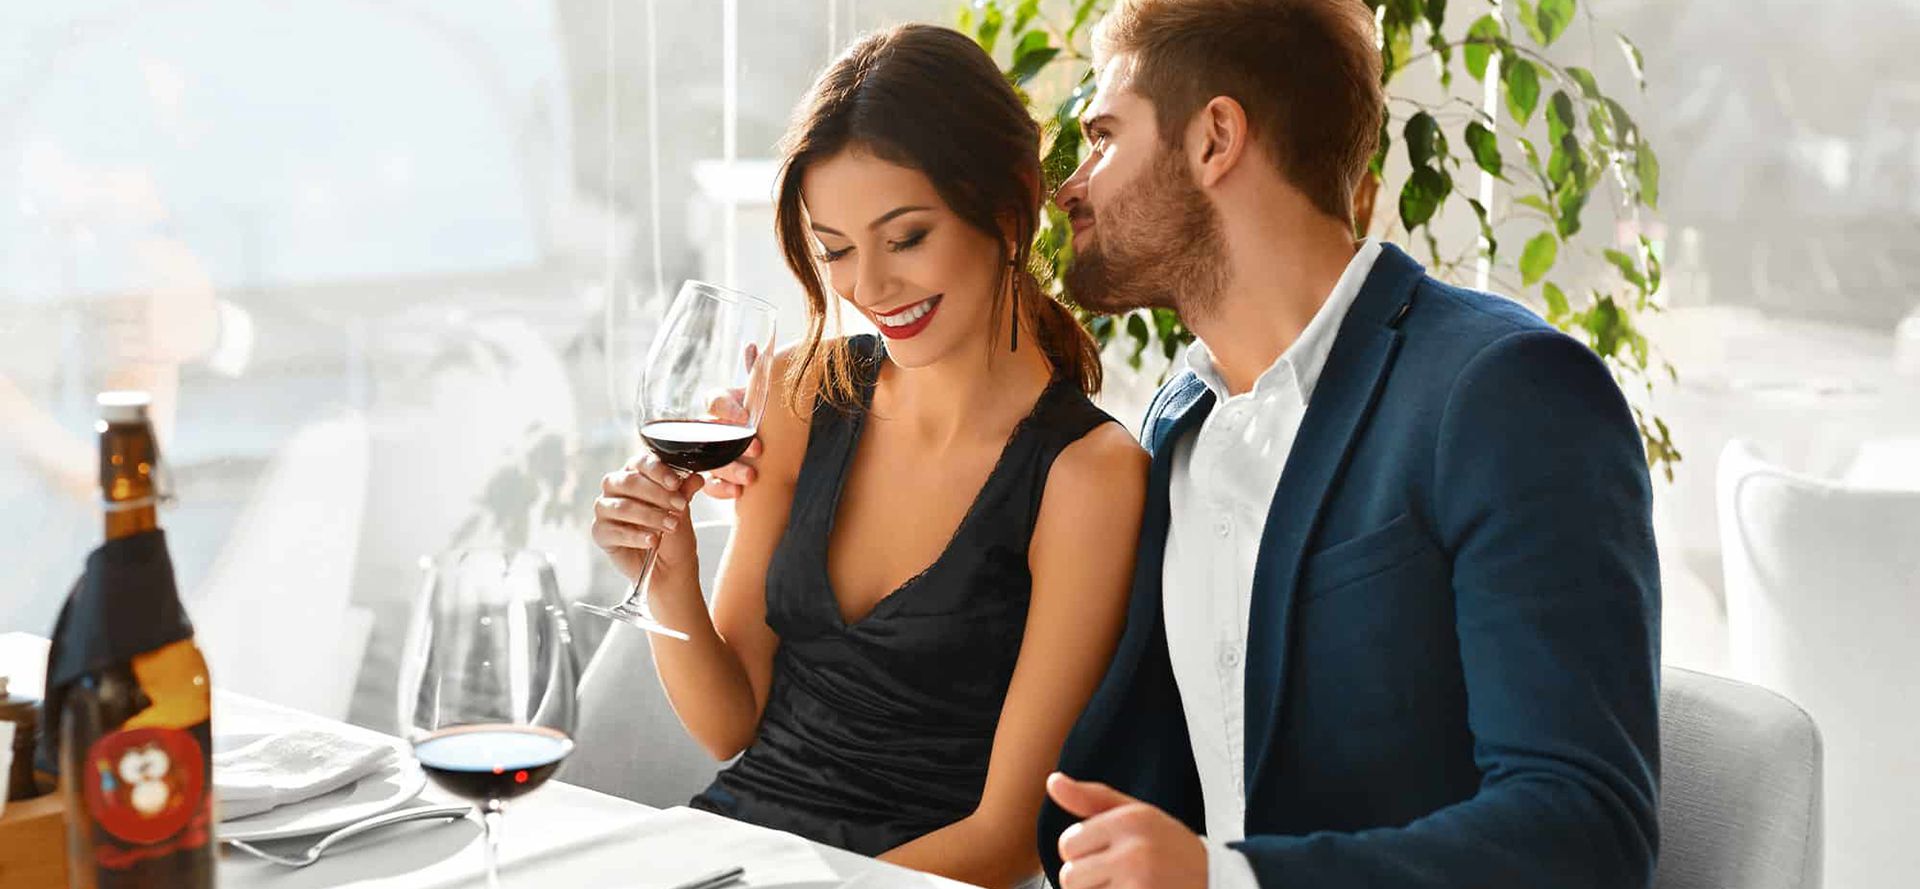 Libra man drinking wine with woman.